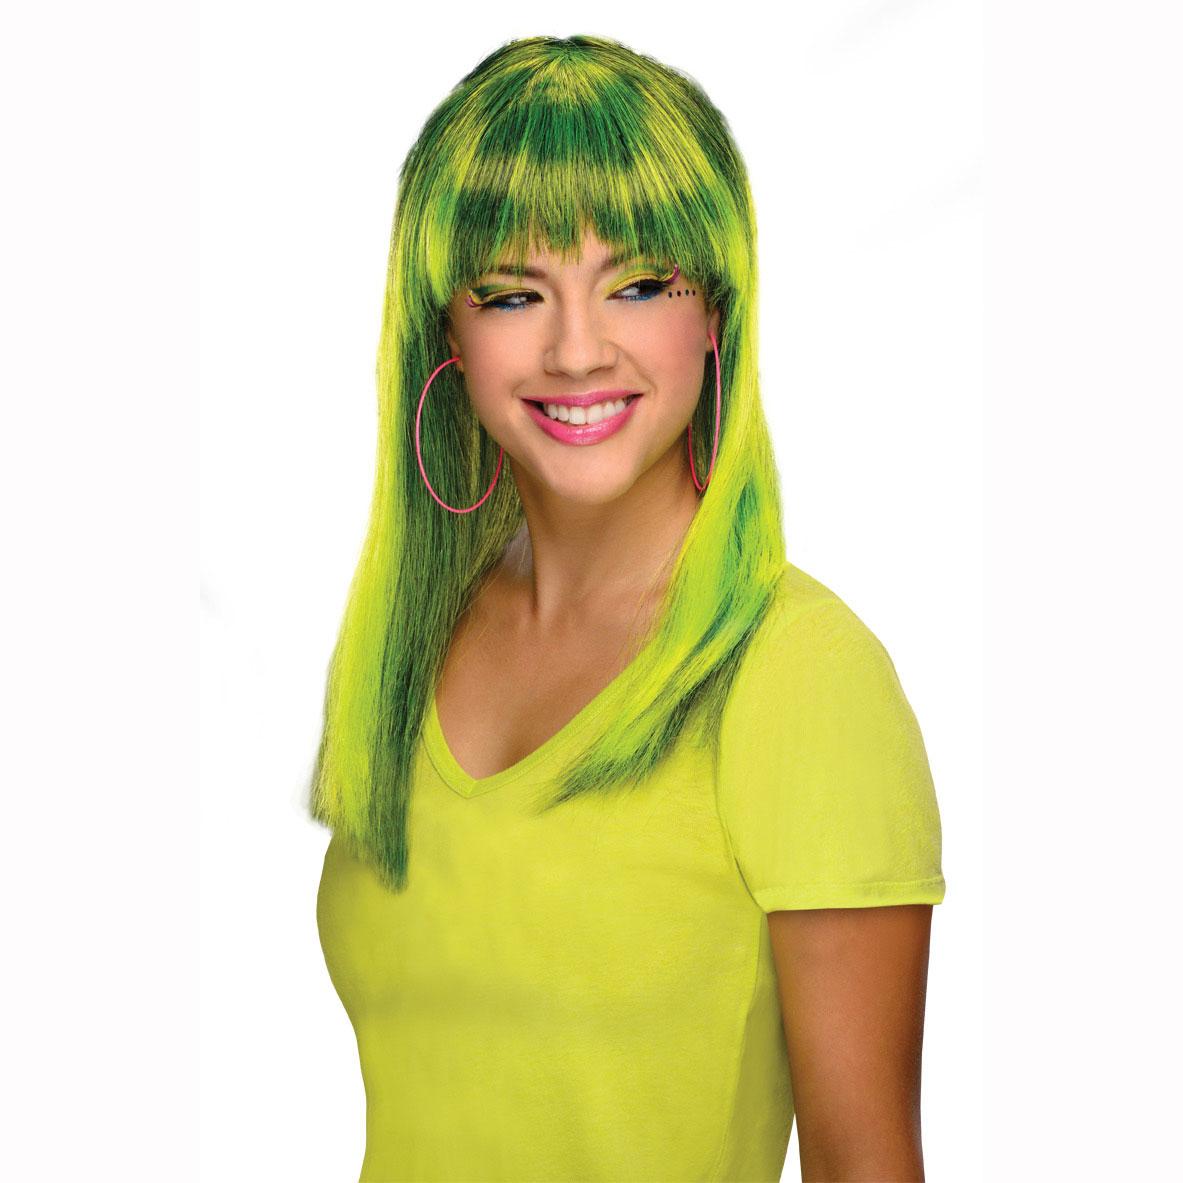 Neon Glamorous Yellow Wig Costumes & Apparel - Party Centre